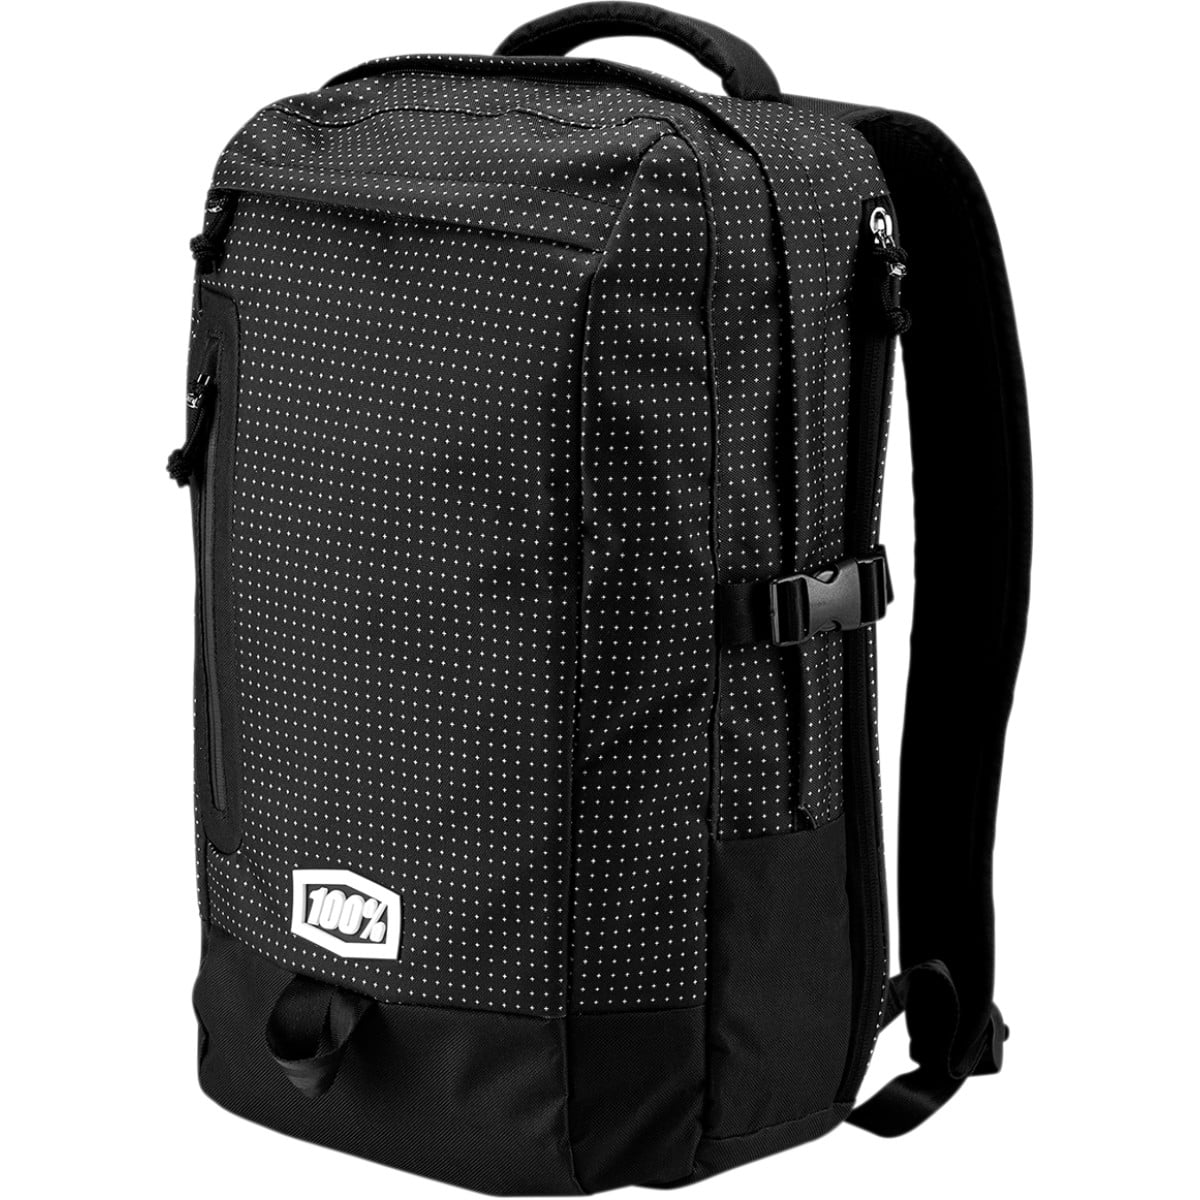 Buy Transit Carry-on Backpack for USD 100.00